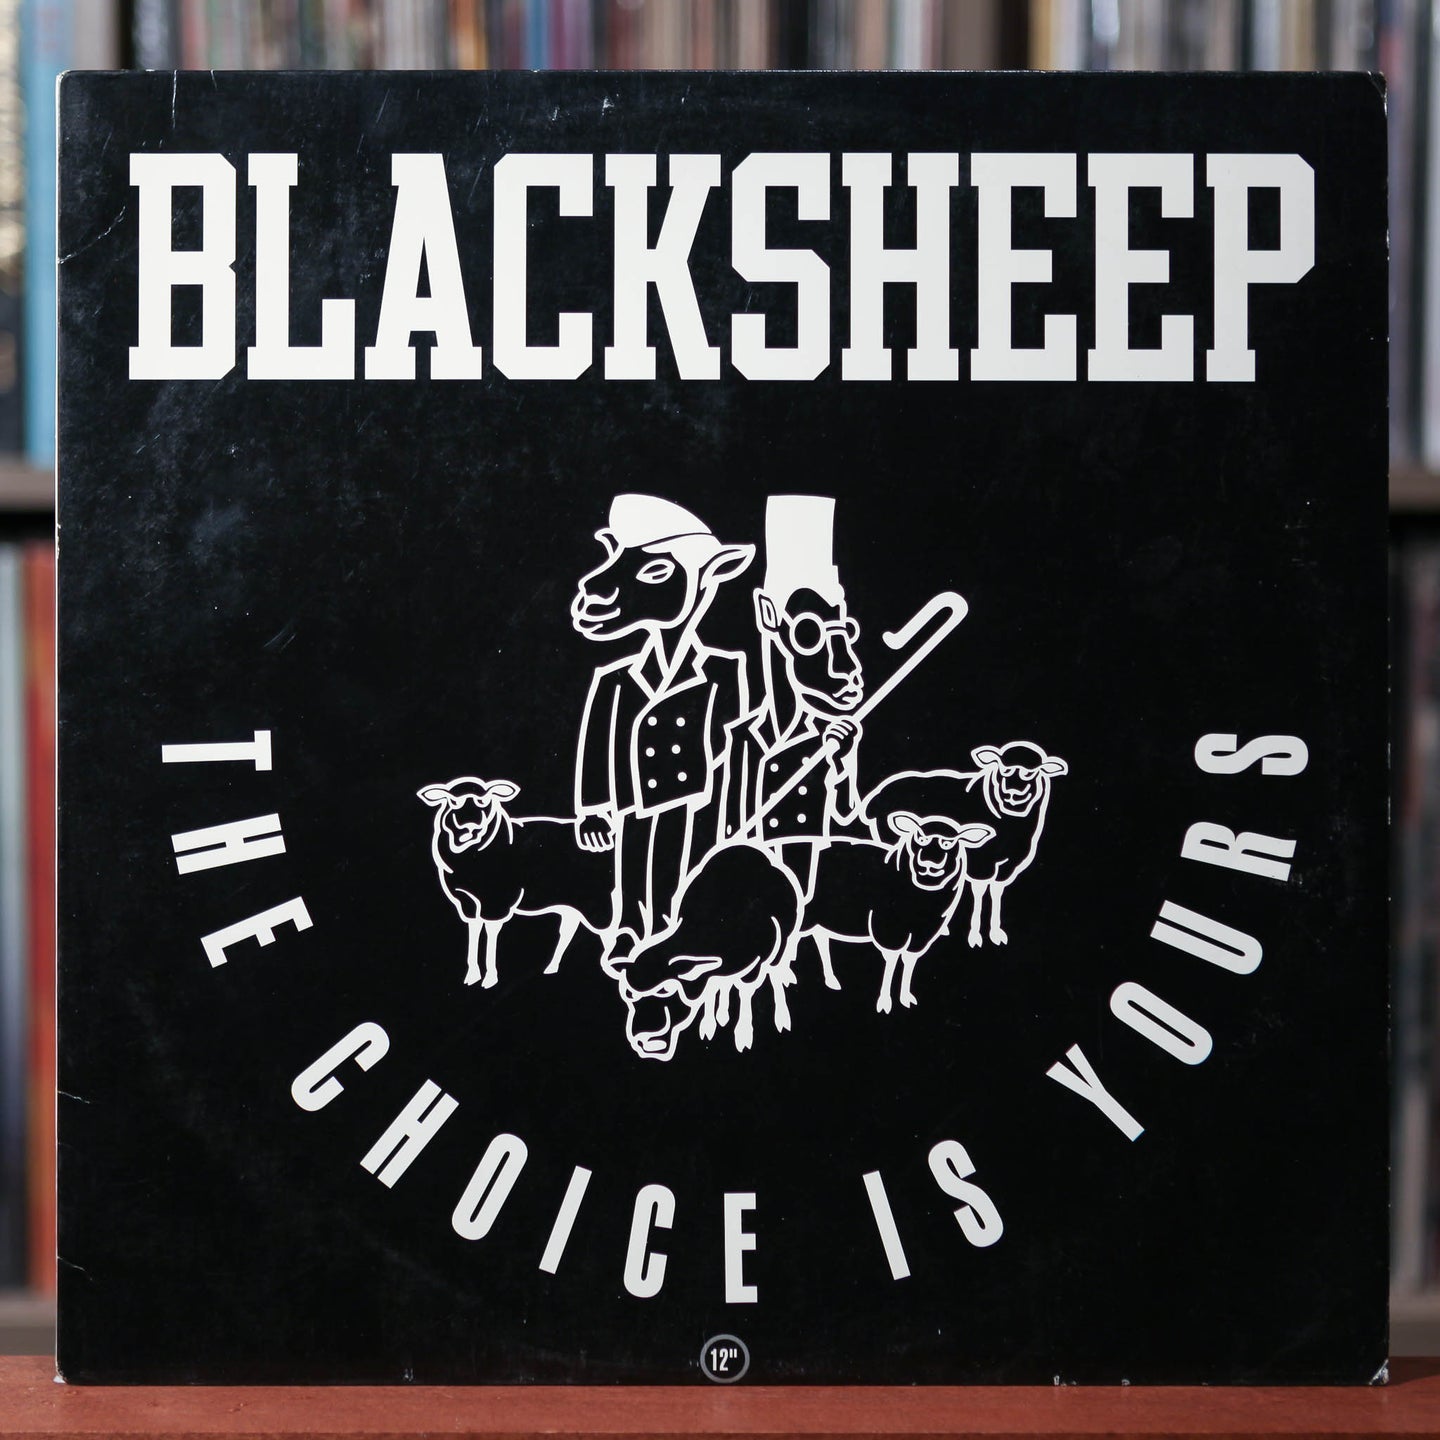 BlackSheep - The Choice Is Yours - 12